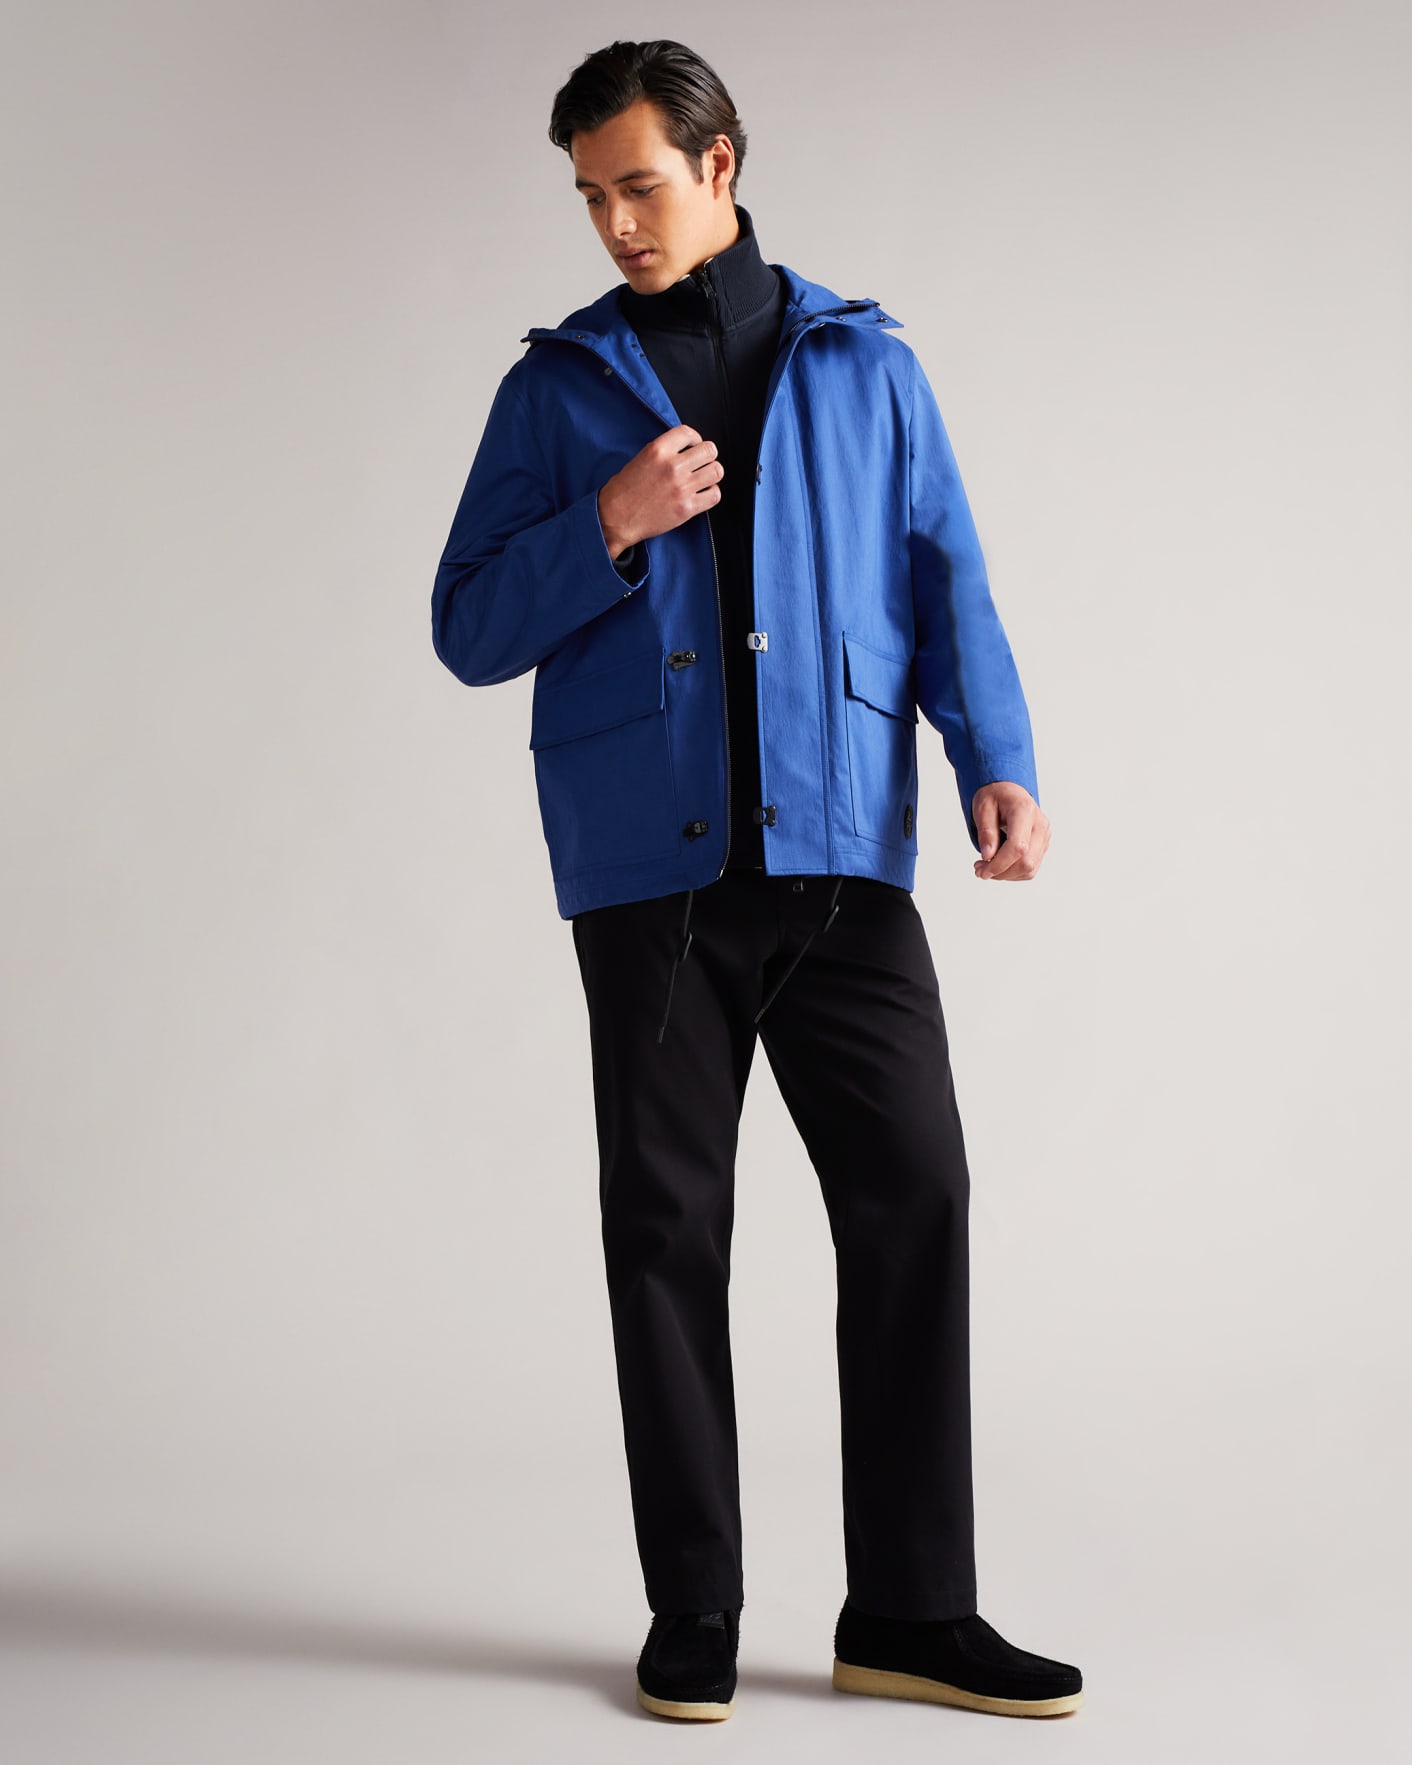 Bright Blue Textured Hooded Jacket Ted Baker